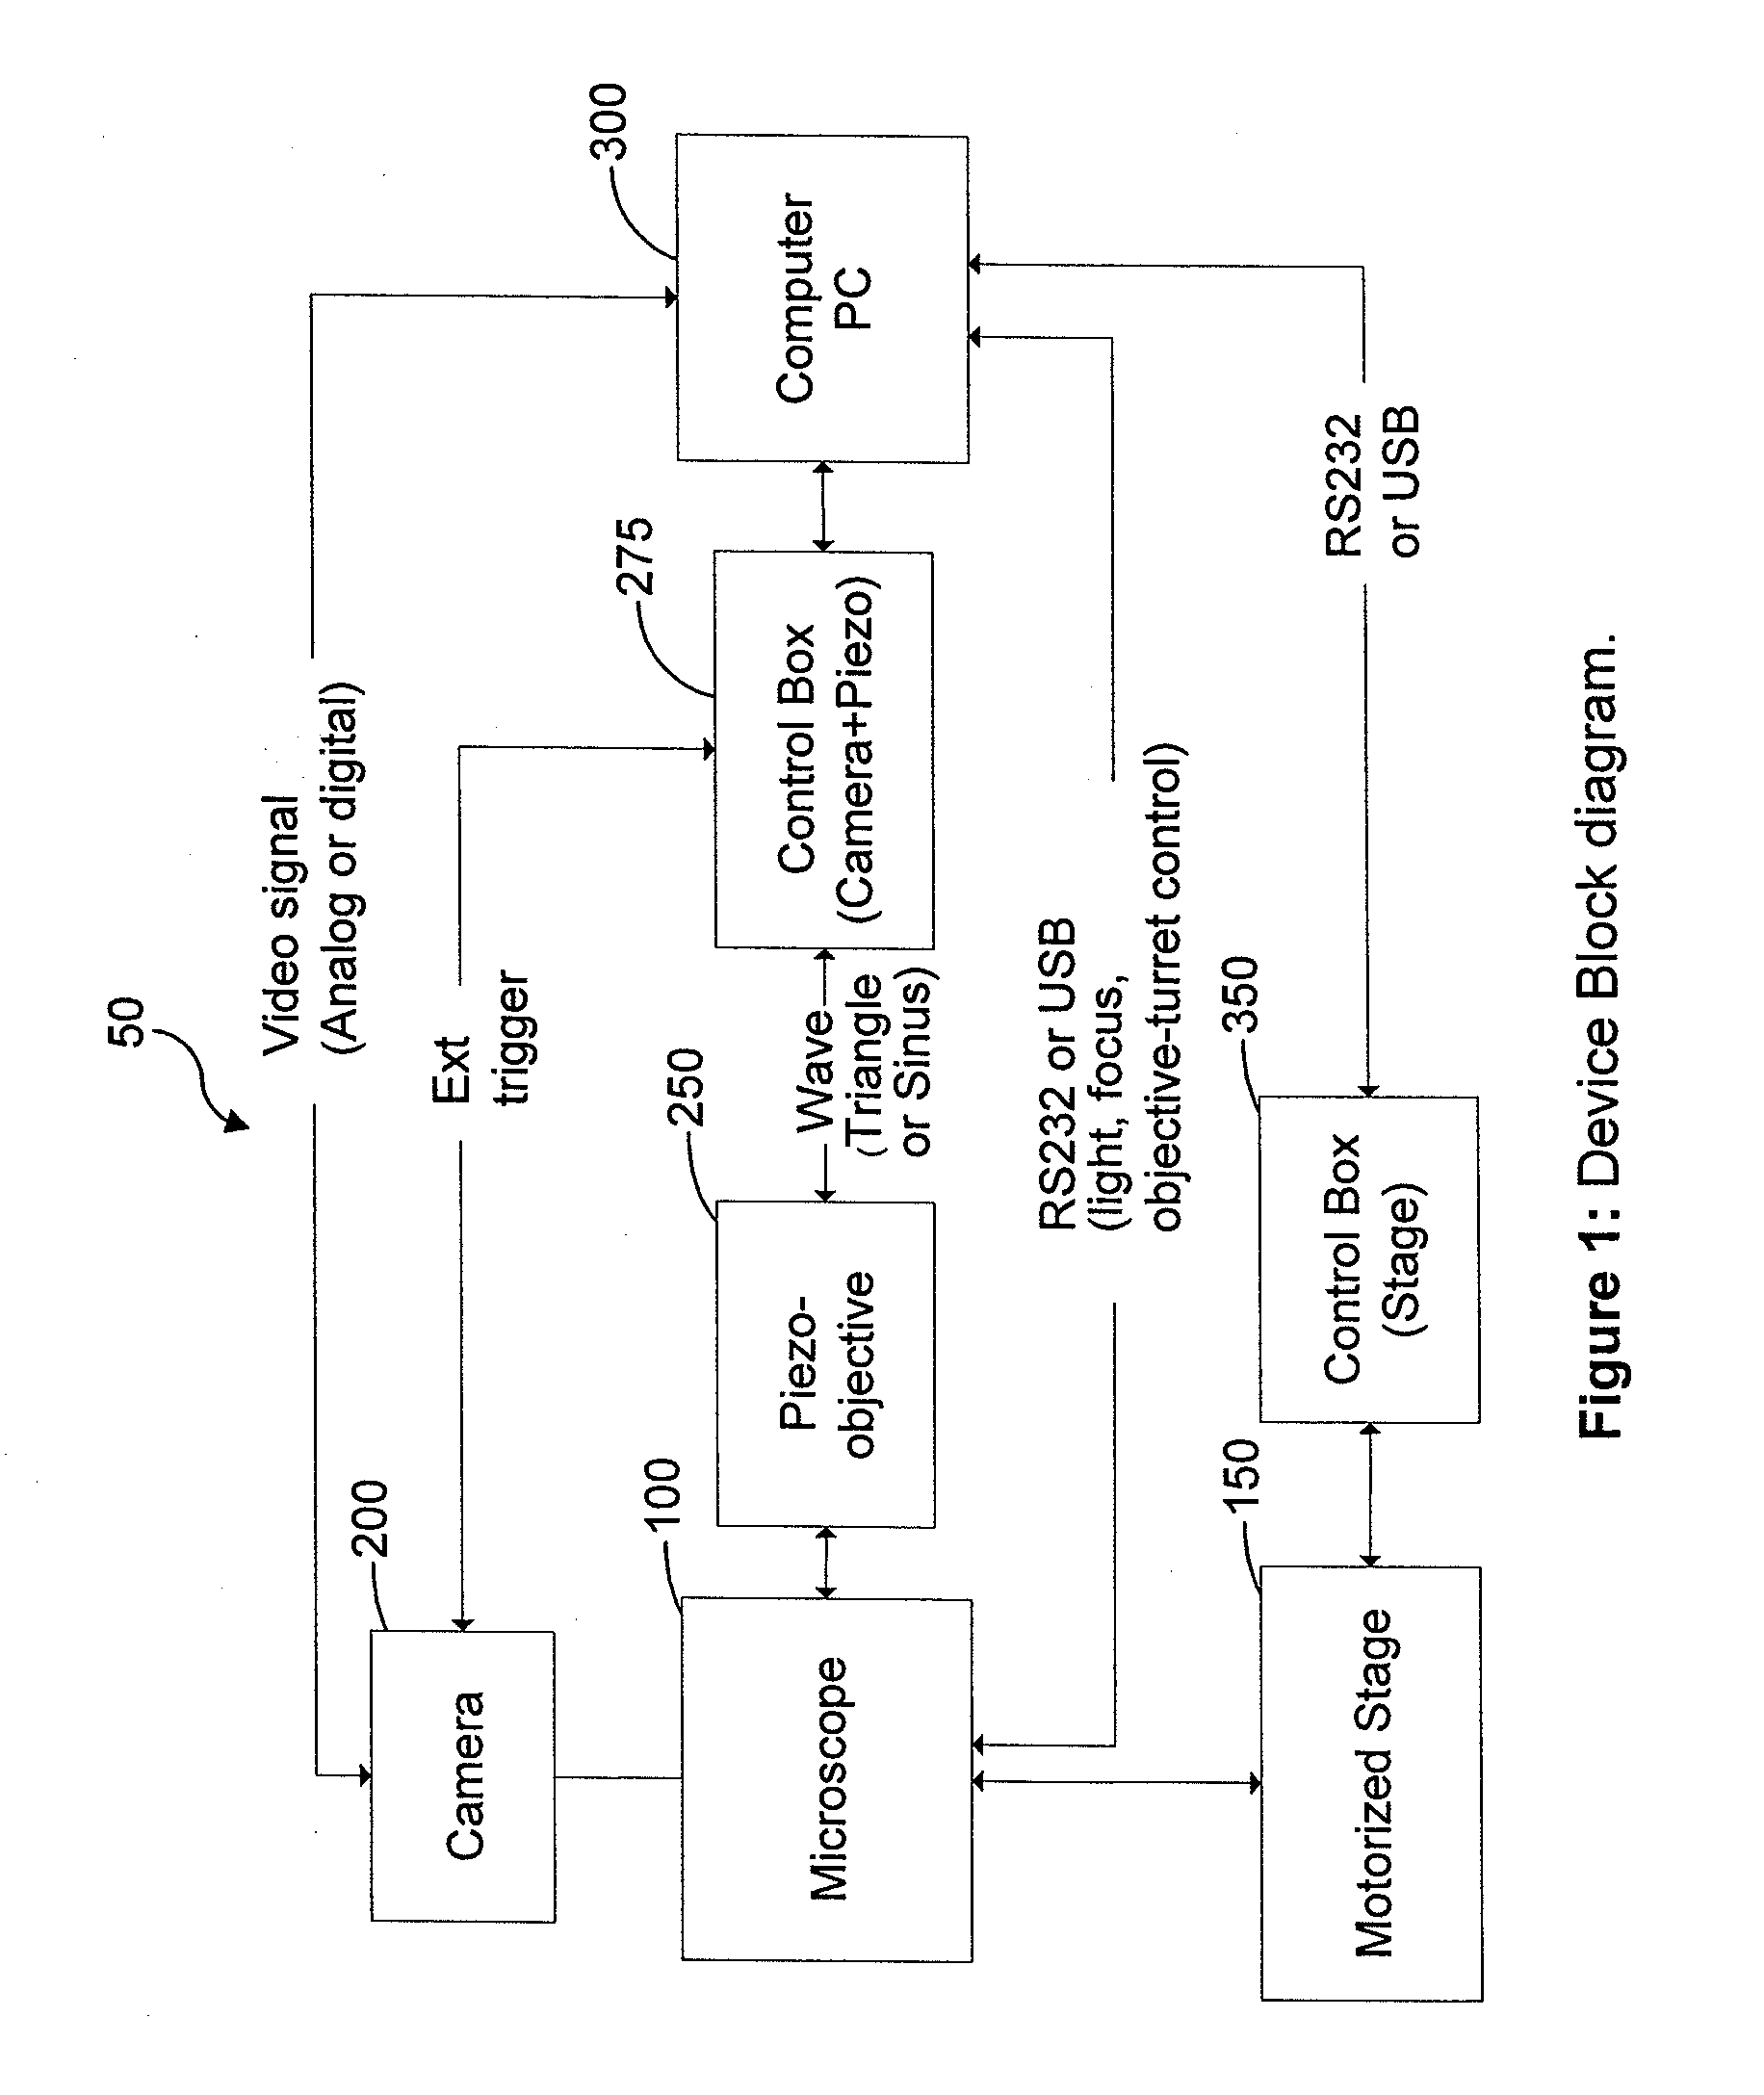 Apparatus and Method for Rapid Microscopic Image Focusing